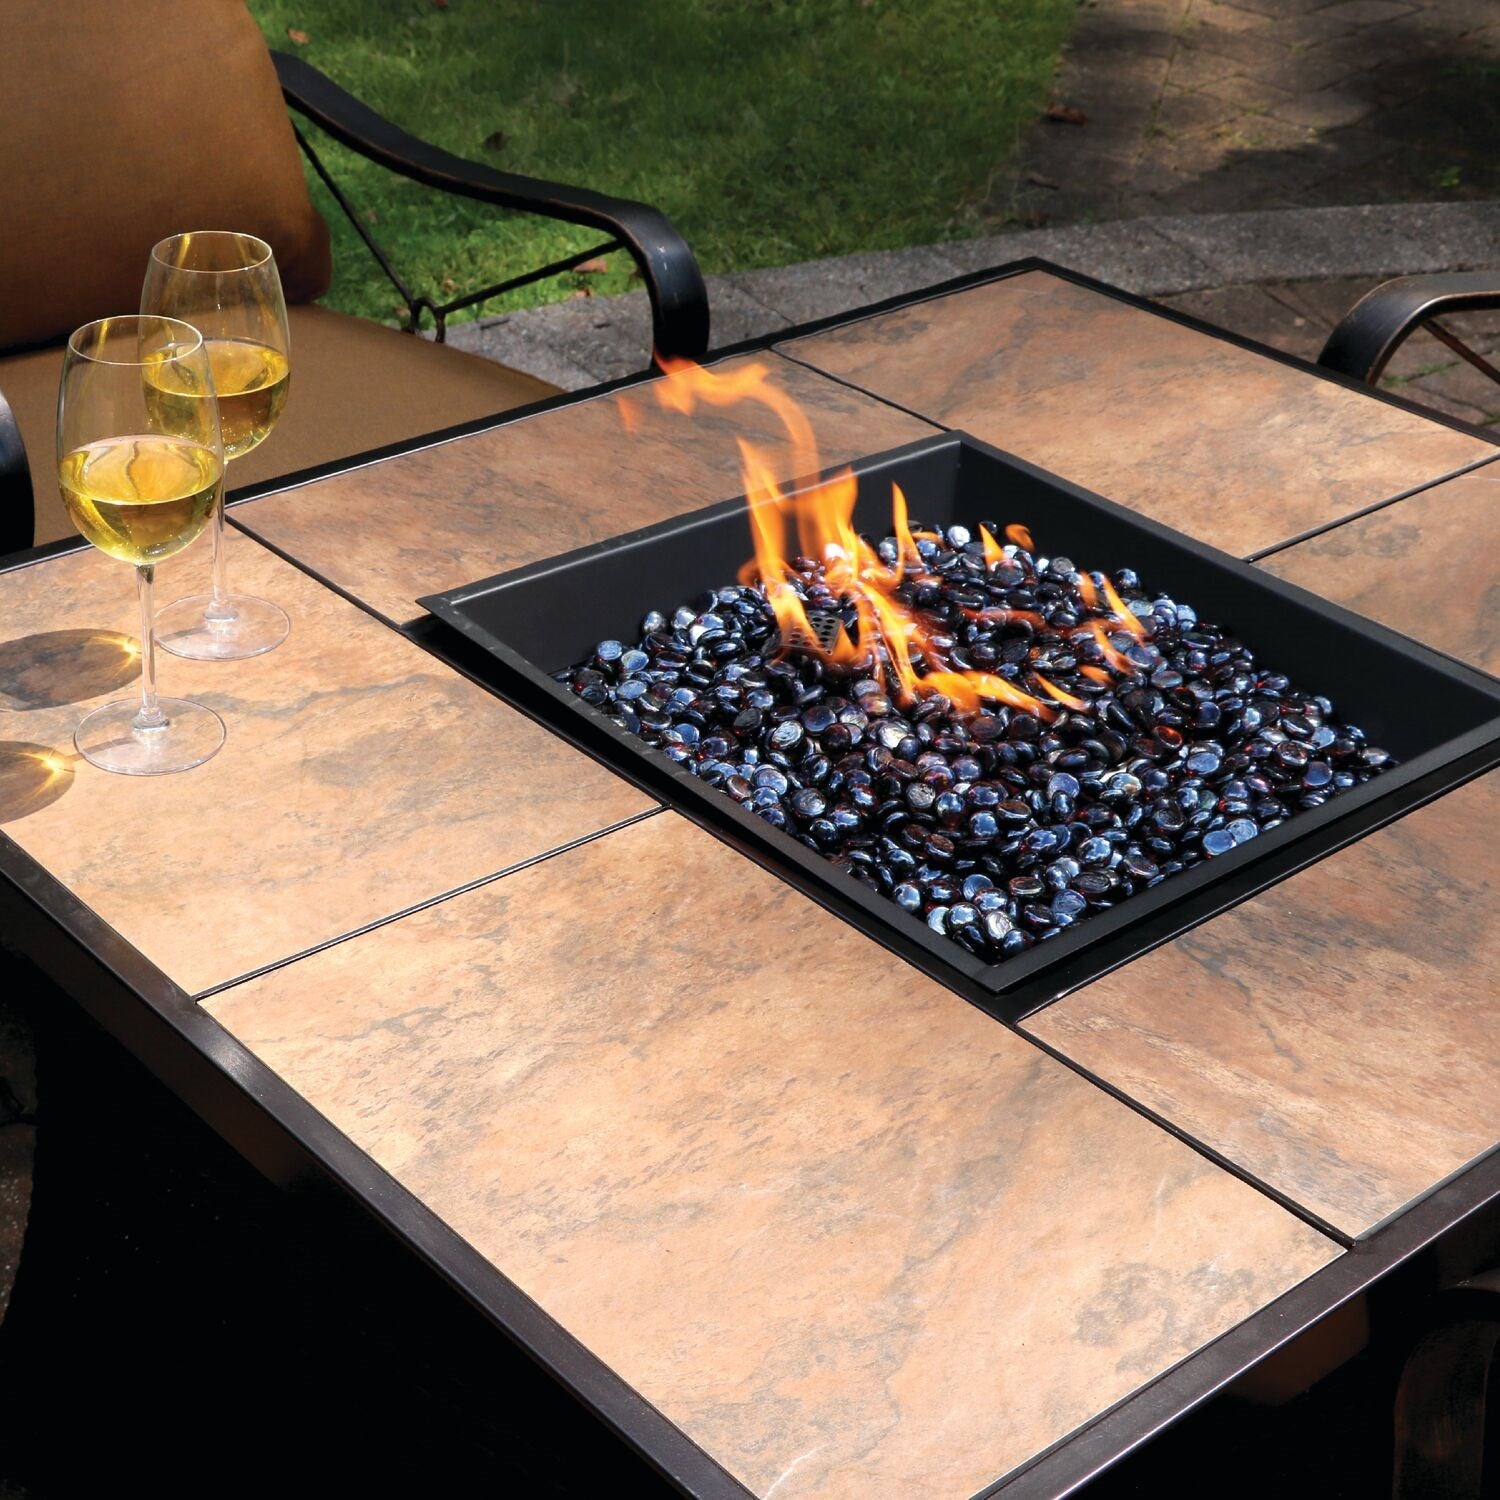 Hanover - Summer Nights 5 piece Fire Pit: 4 cushion rockers, woven fire pit with tile top - SUMMR5PCWVFP-TL